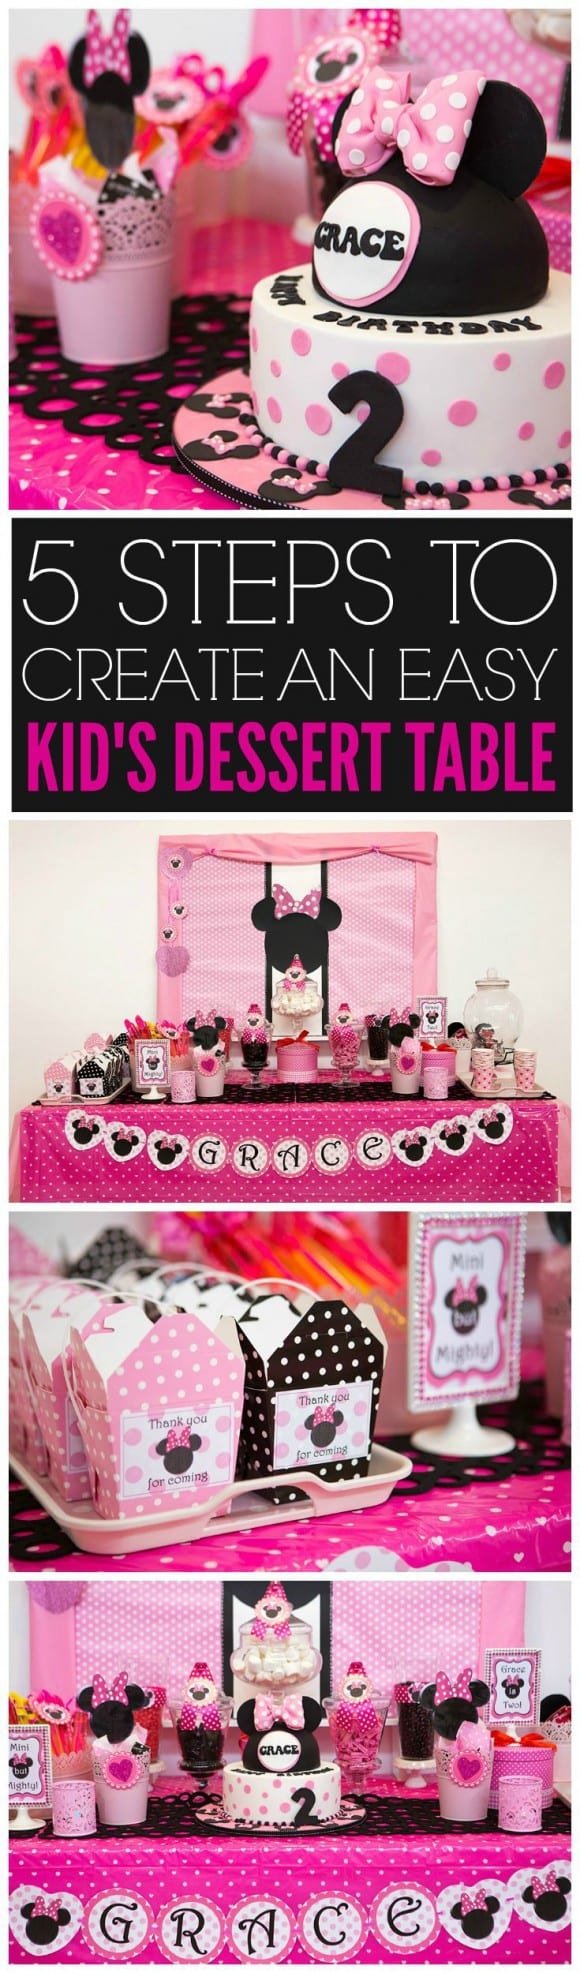 5 Steps to Create An Easy Child Dessert Table | CatchMyParty.com